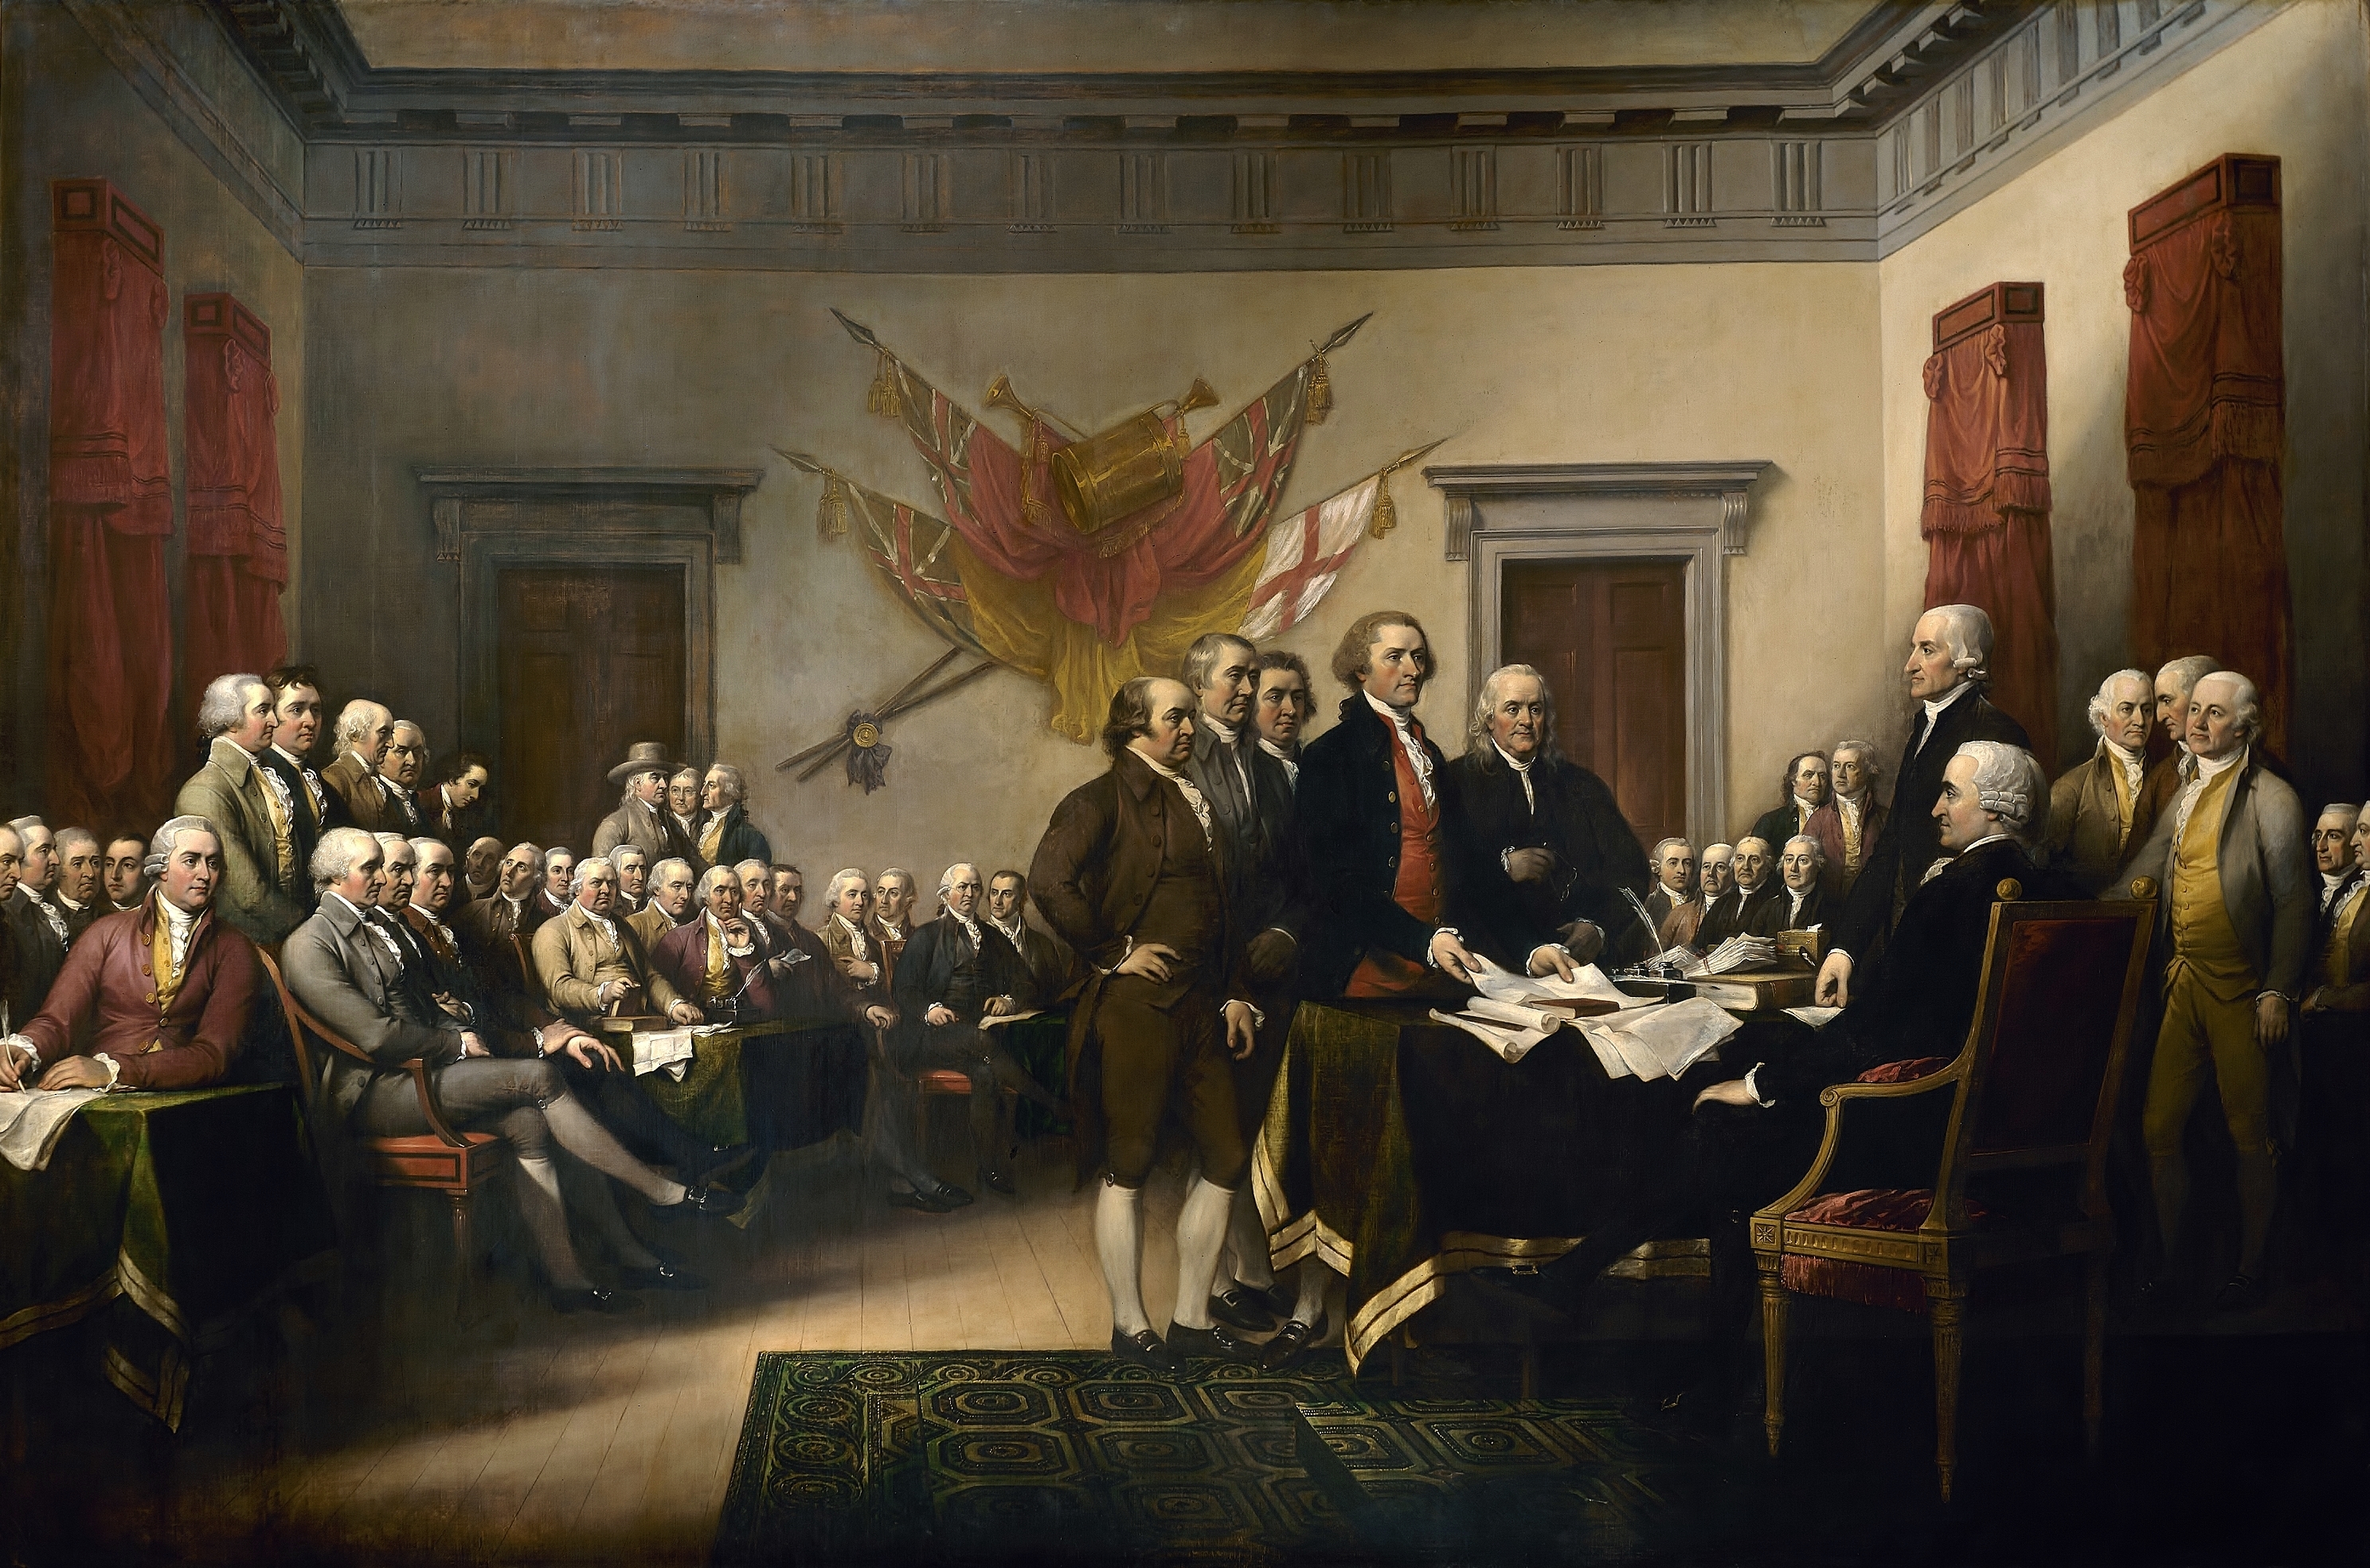 "Declaration of Independence"